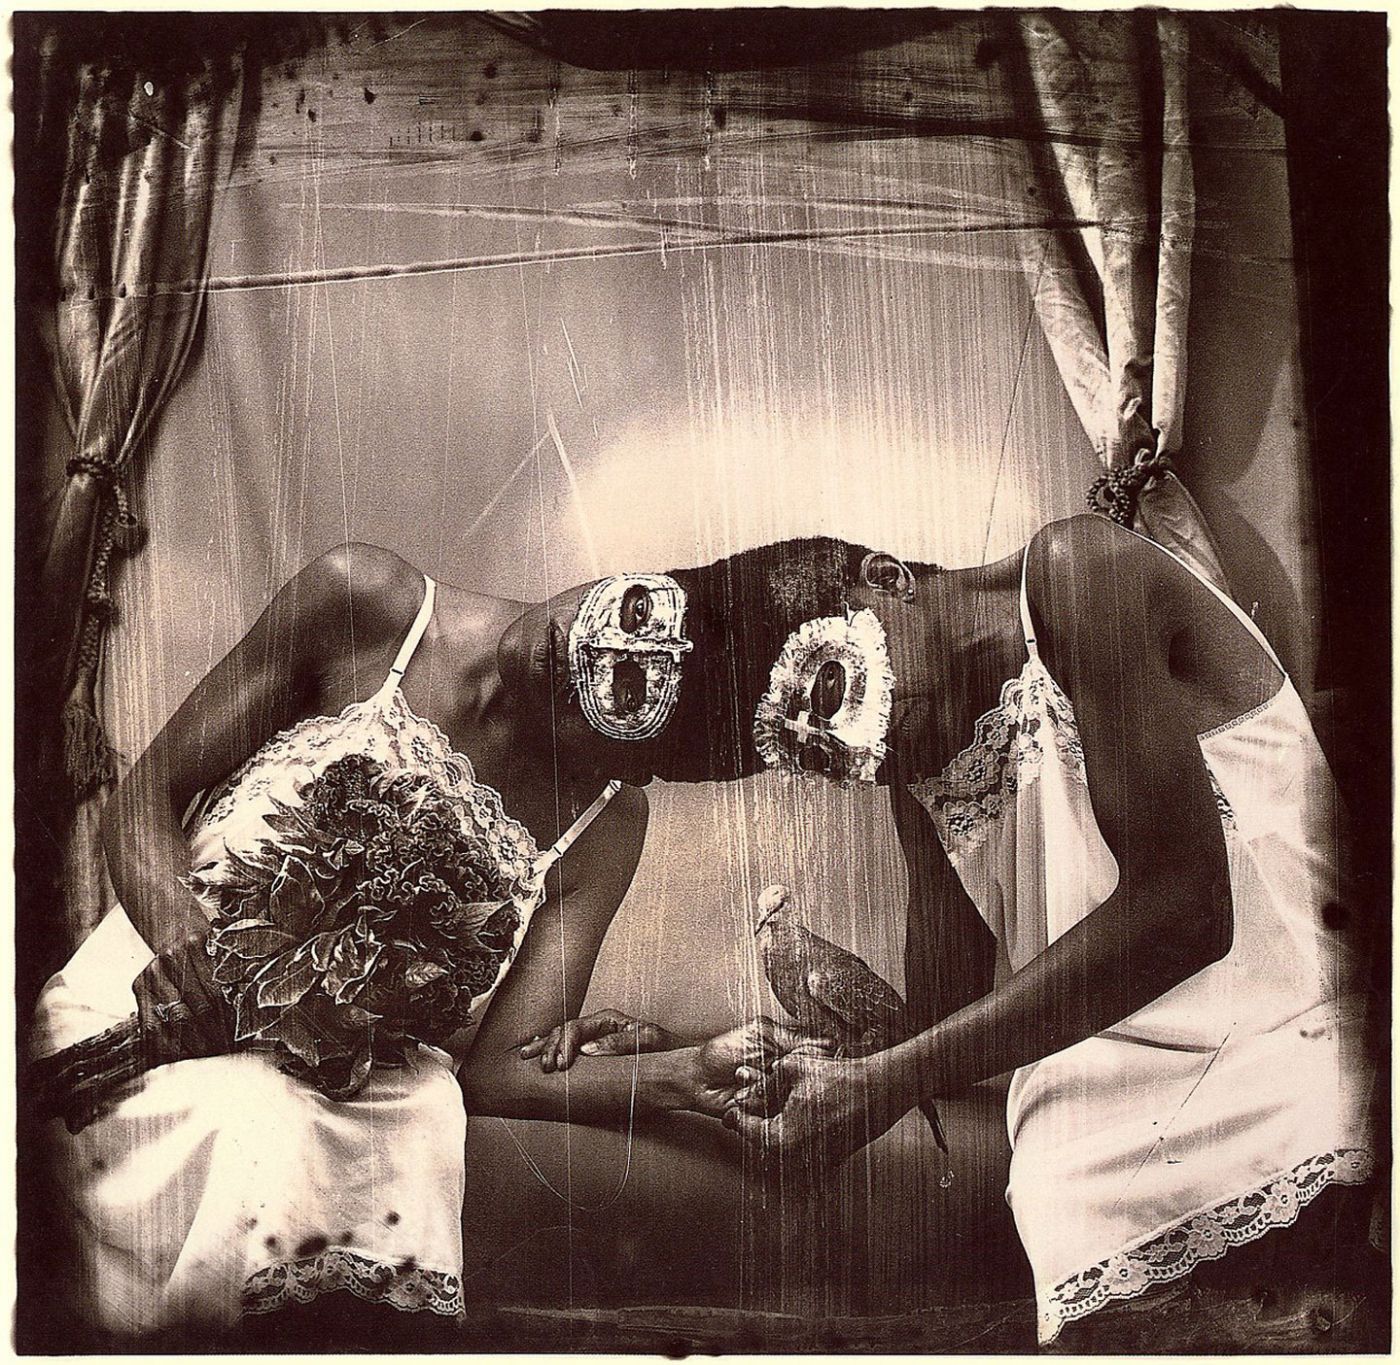 Joel-Peter Witkin: Gods of Earth and Heaven (Second Edition)